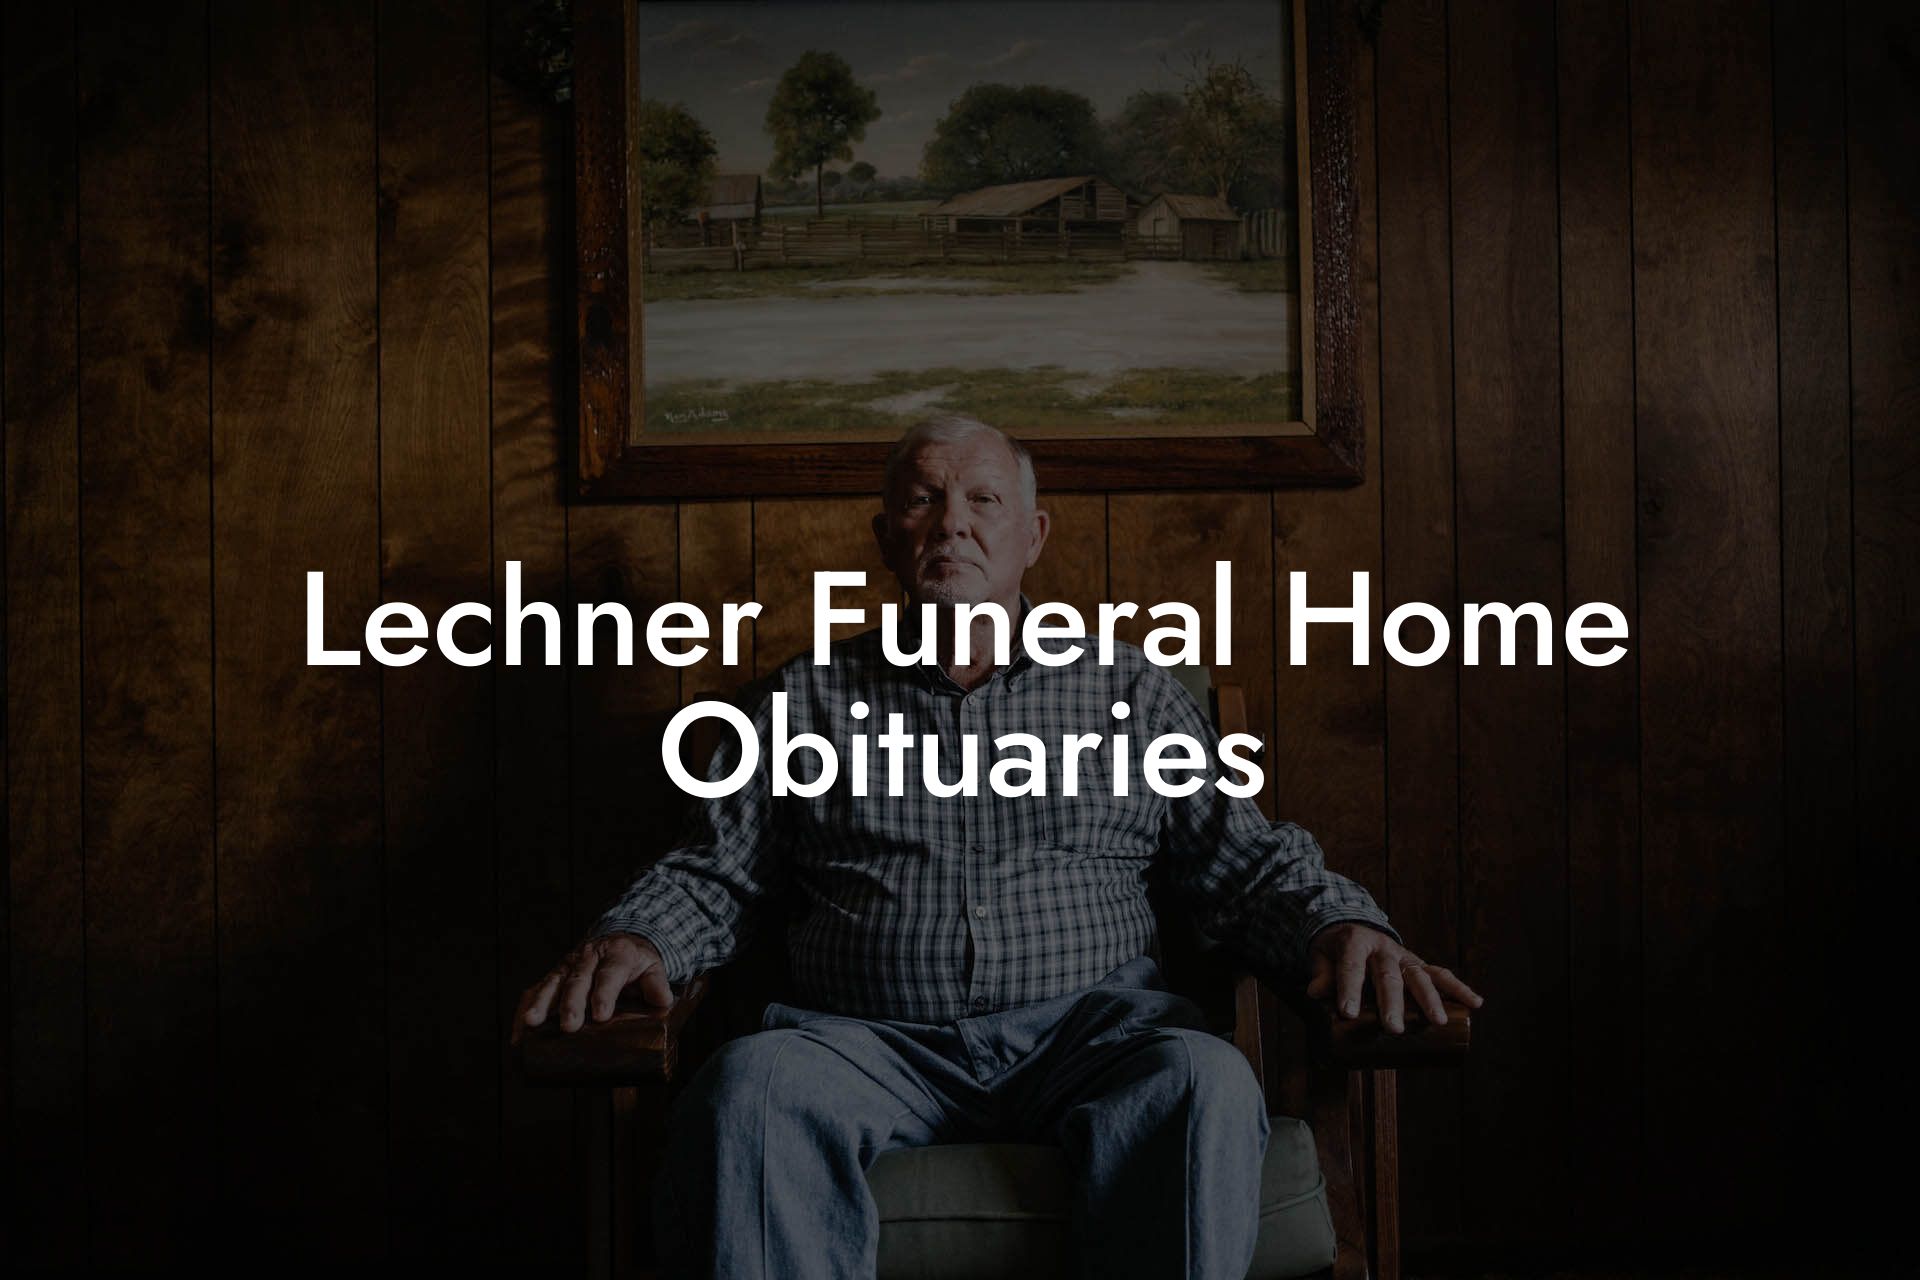 Lechner Funeral Home Obituaries